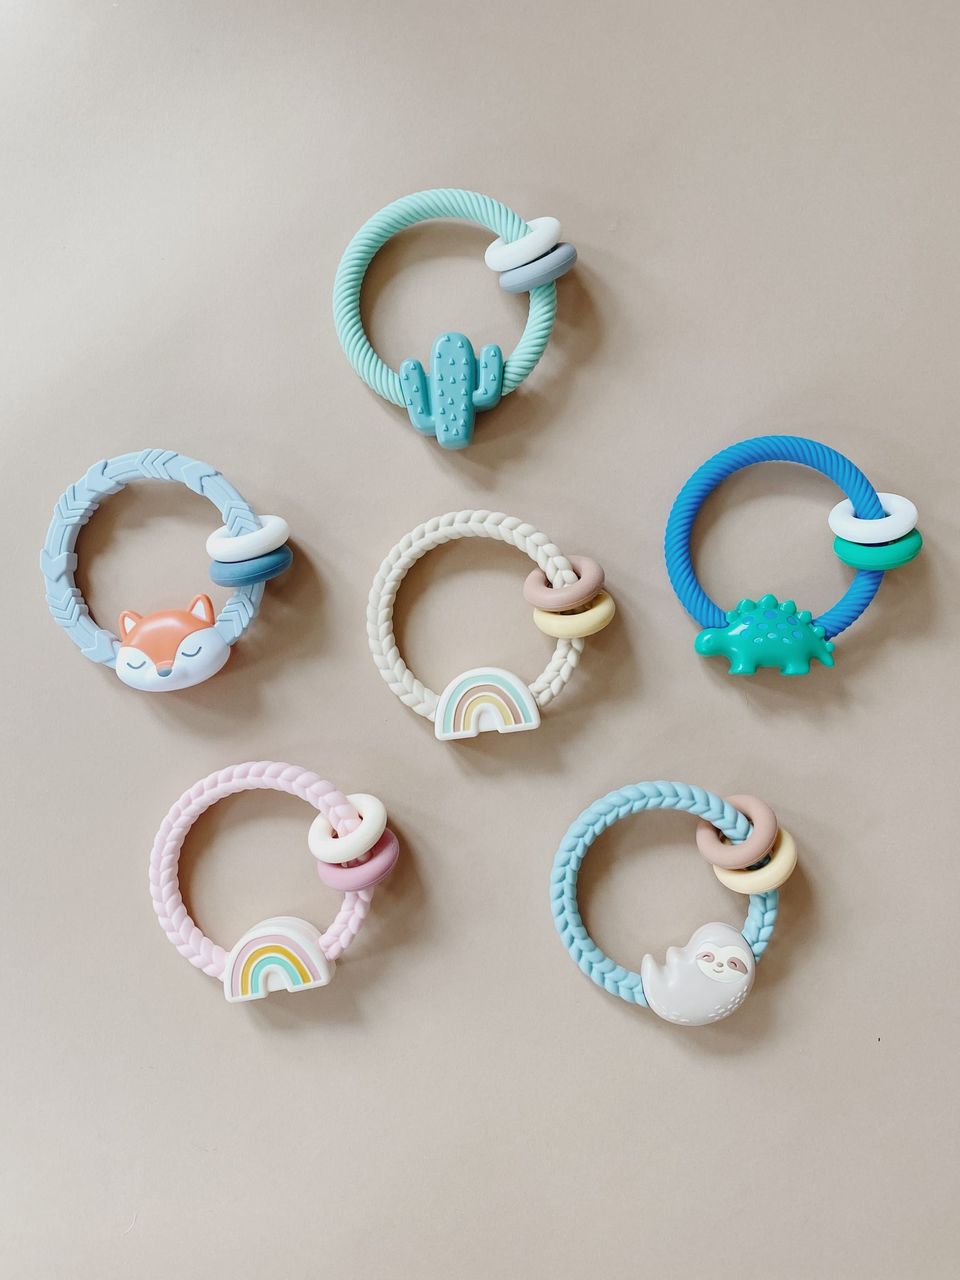 Itzy Ritzy Rattle Silicone Teether Rattles 固齒咬咬環 (Fox)